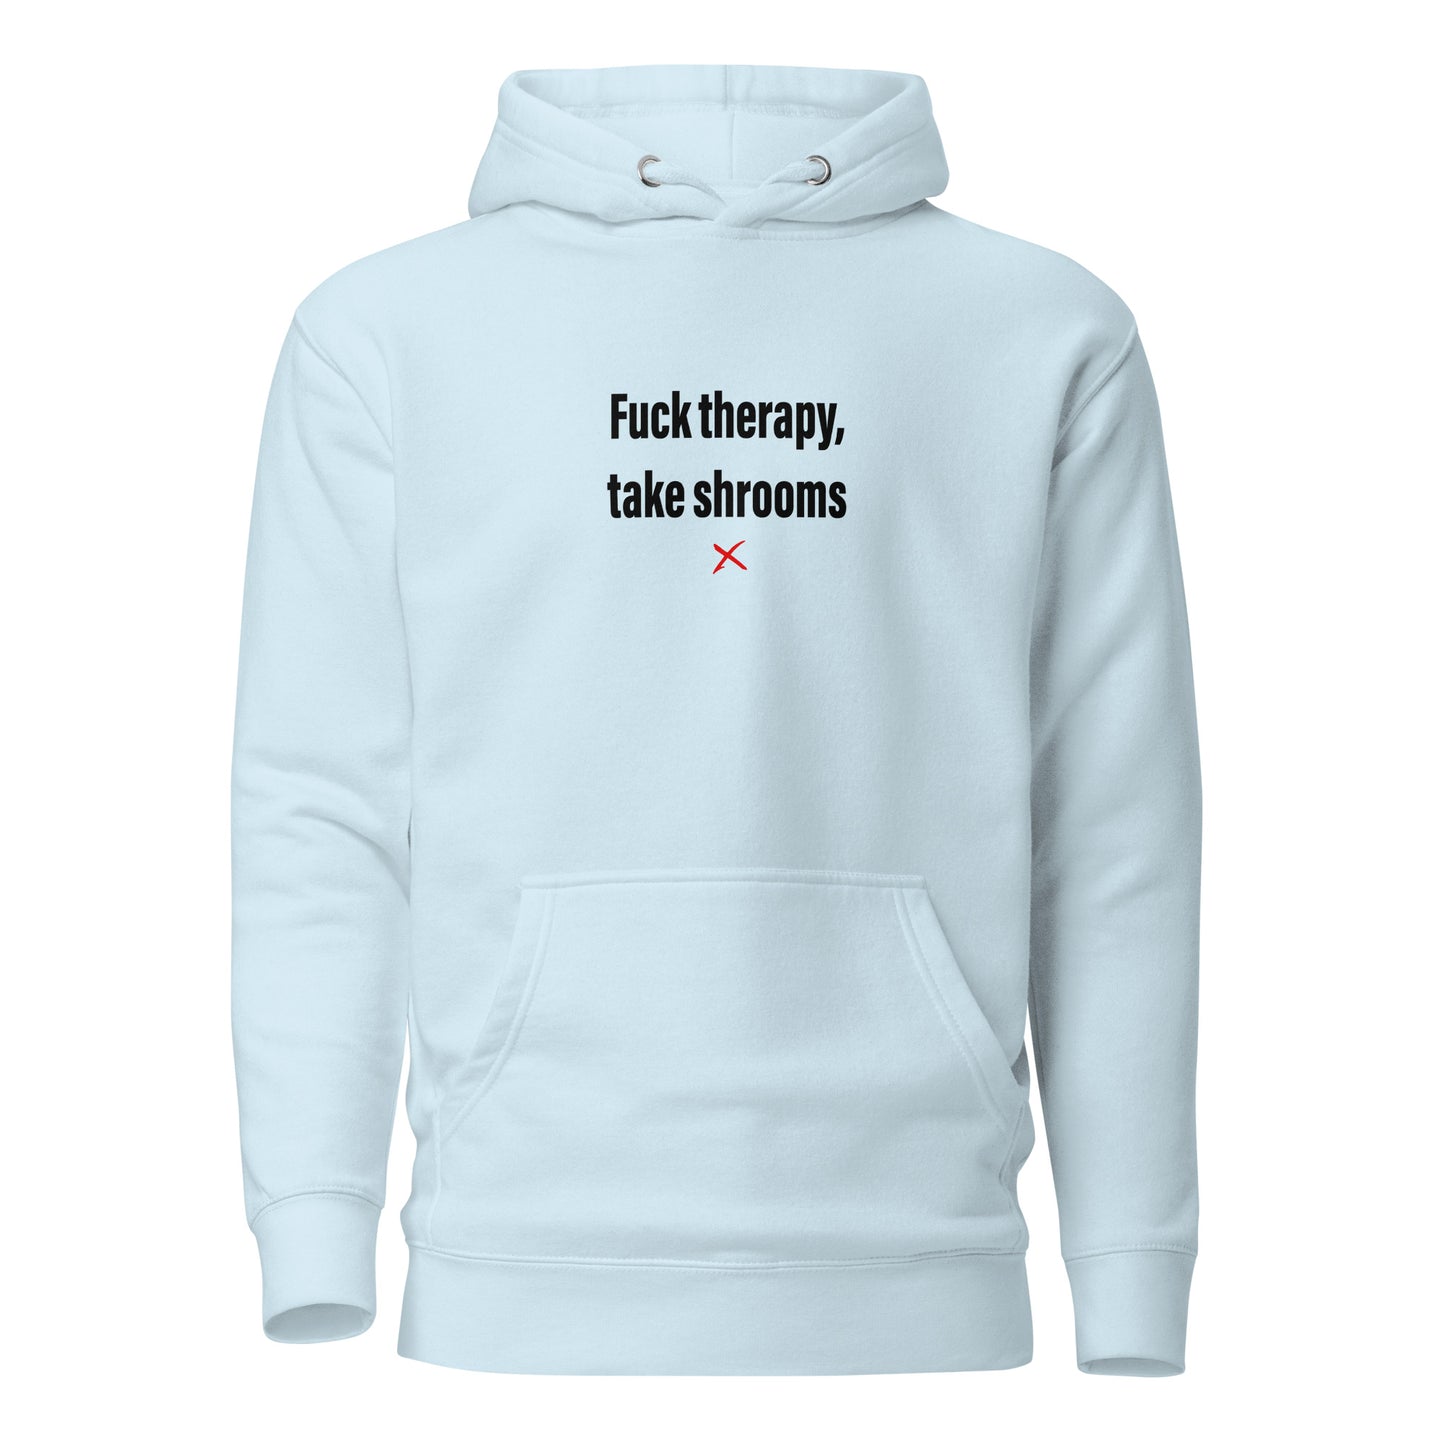 Fuck therapy, take shrooms - Hoodie